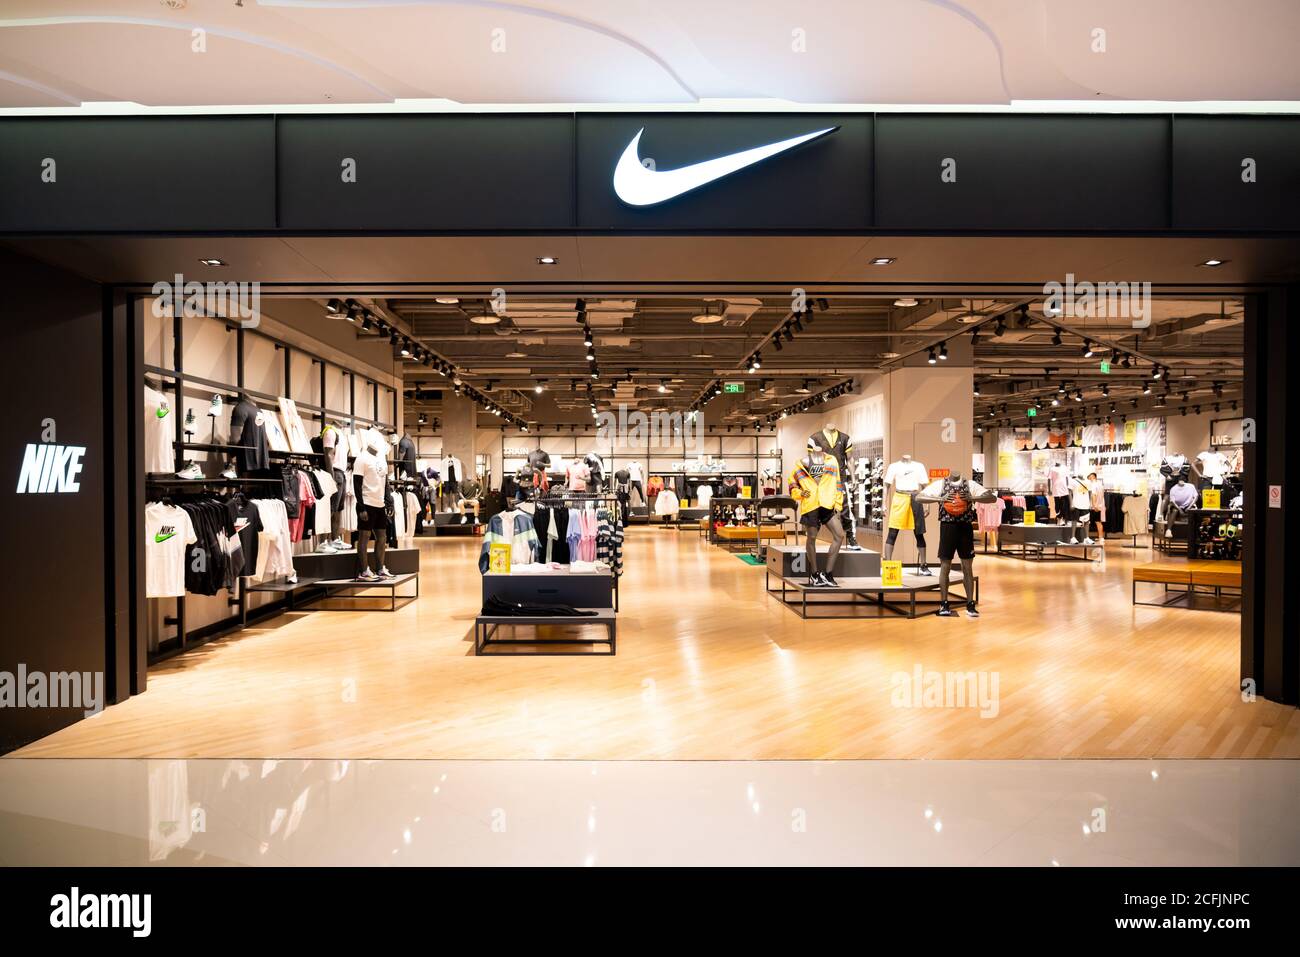 Nike Store 2020 High Resolution Stock Photography and Images - Alamy